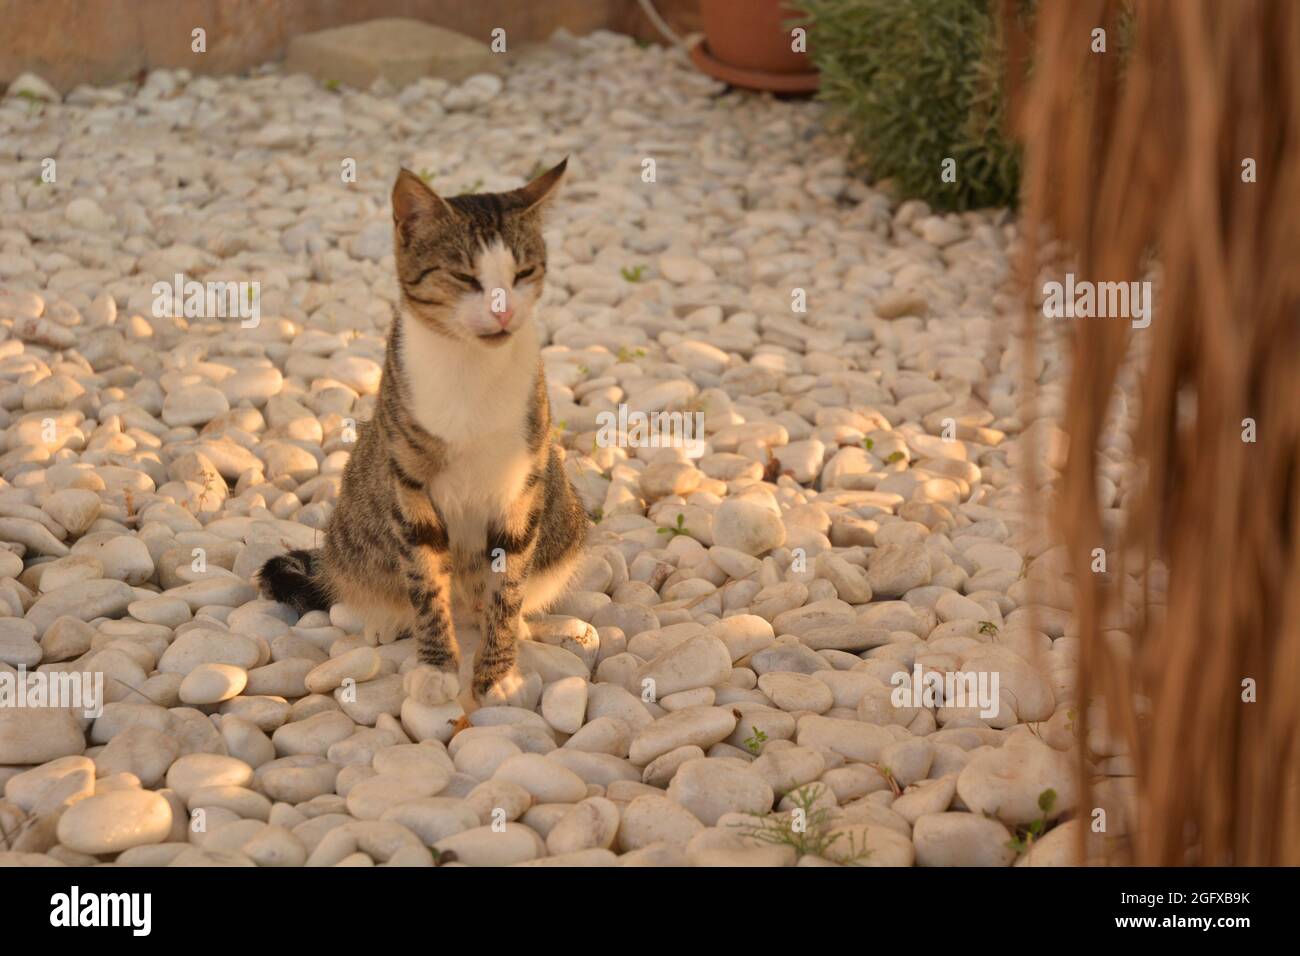 A cat is on the white pebble stones. Stock Photo